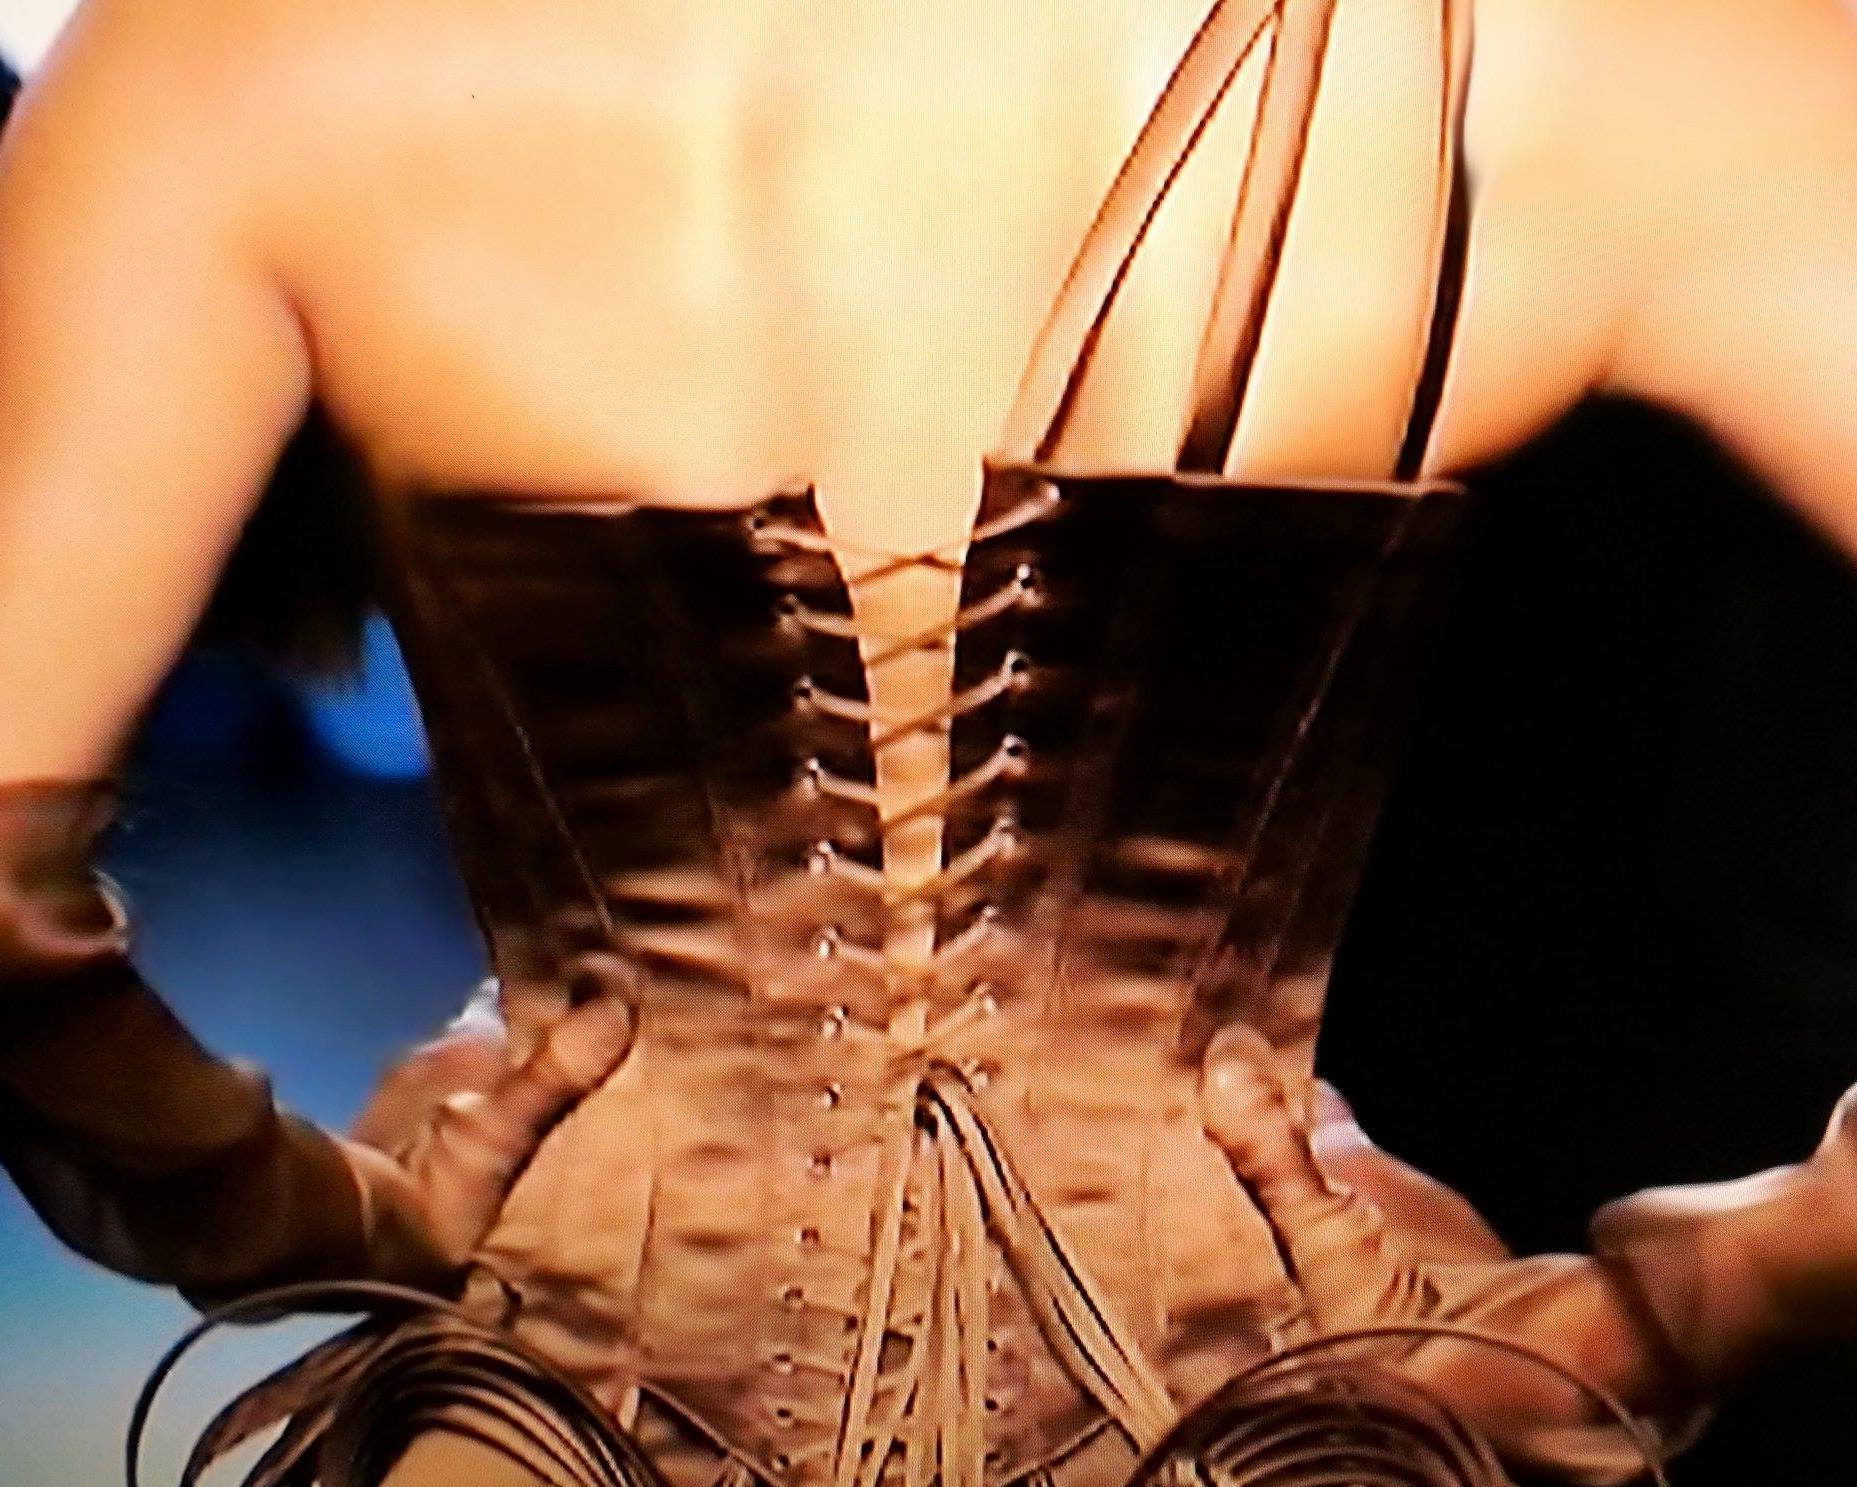 Behind the scene: Jean Paul Gaultier - THE ONE Grand Show 